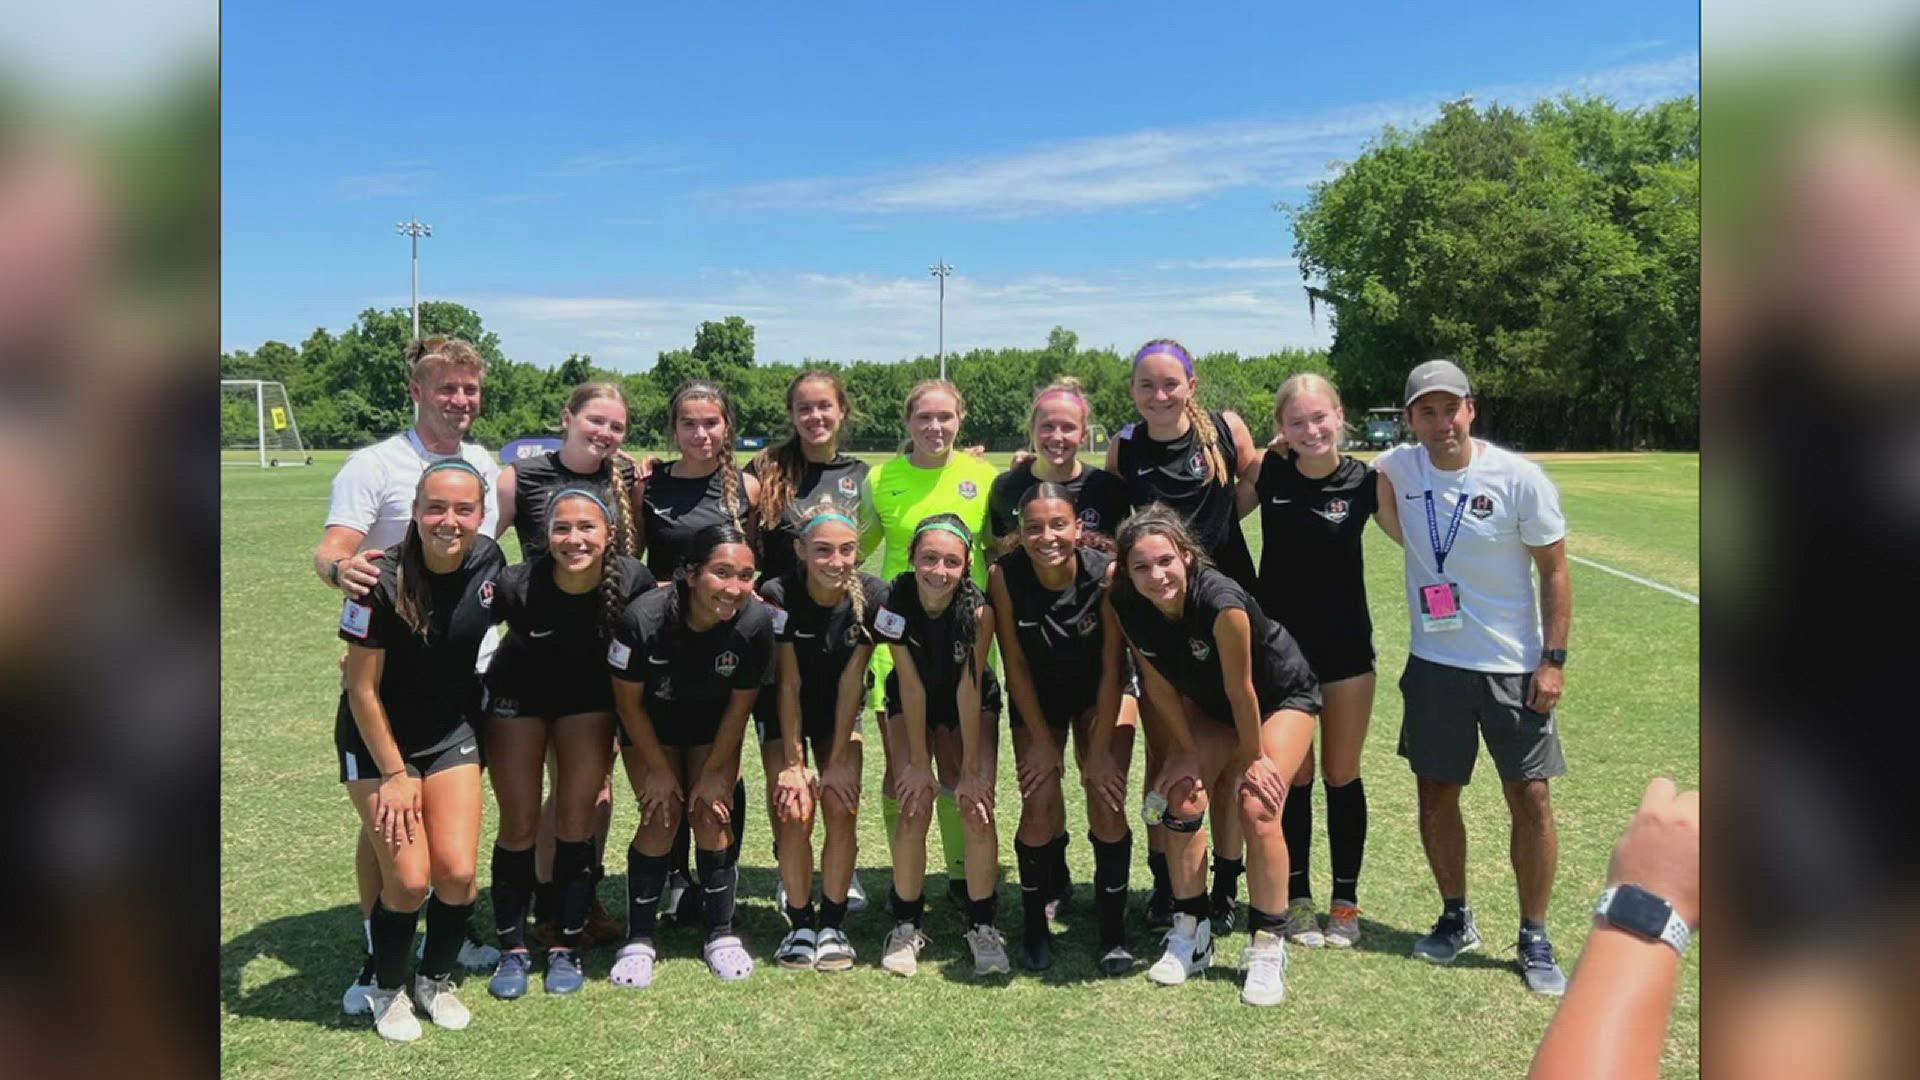 Dash Beaumont 03/04 represented Texas at regionals after winning the state championship.